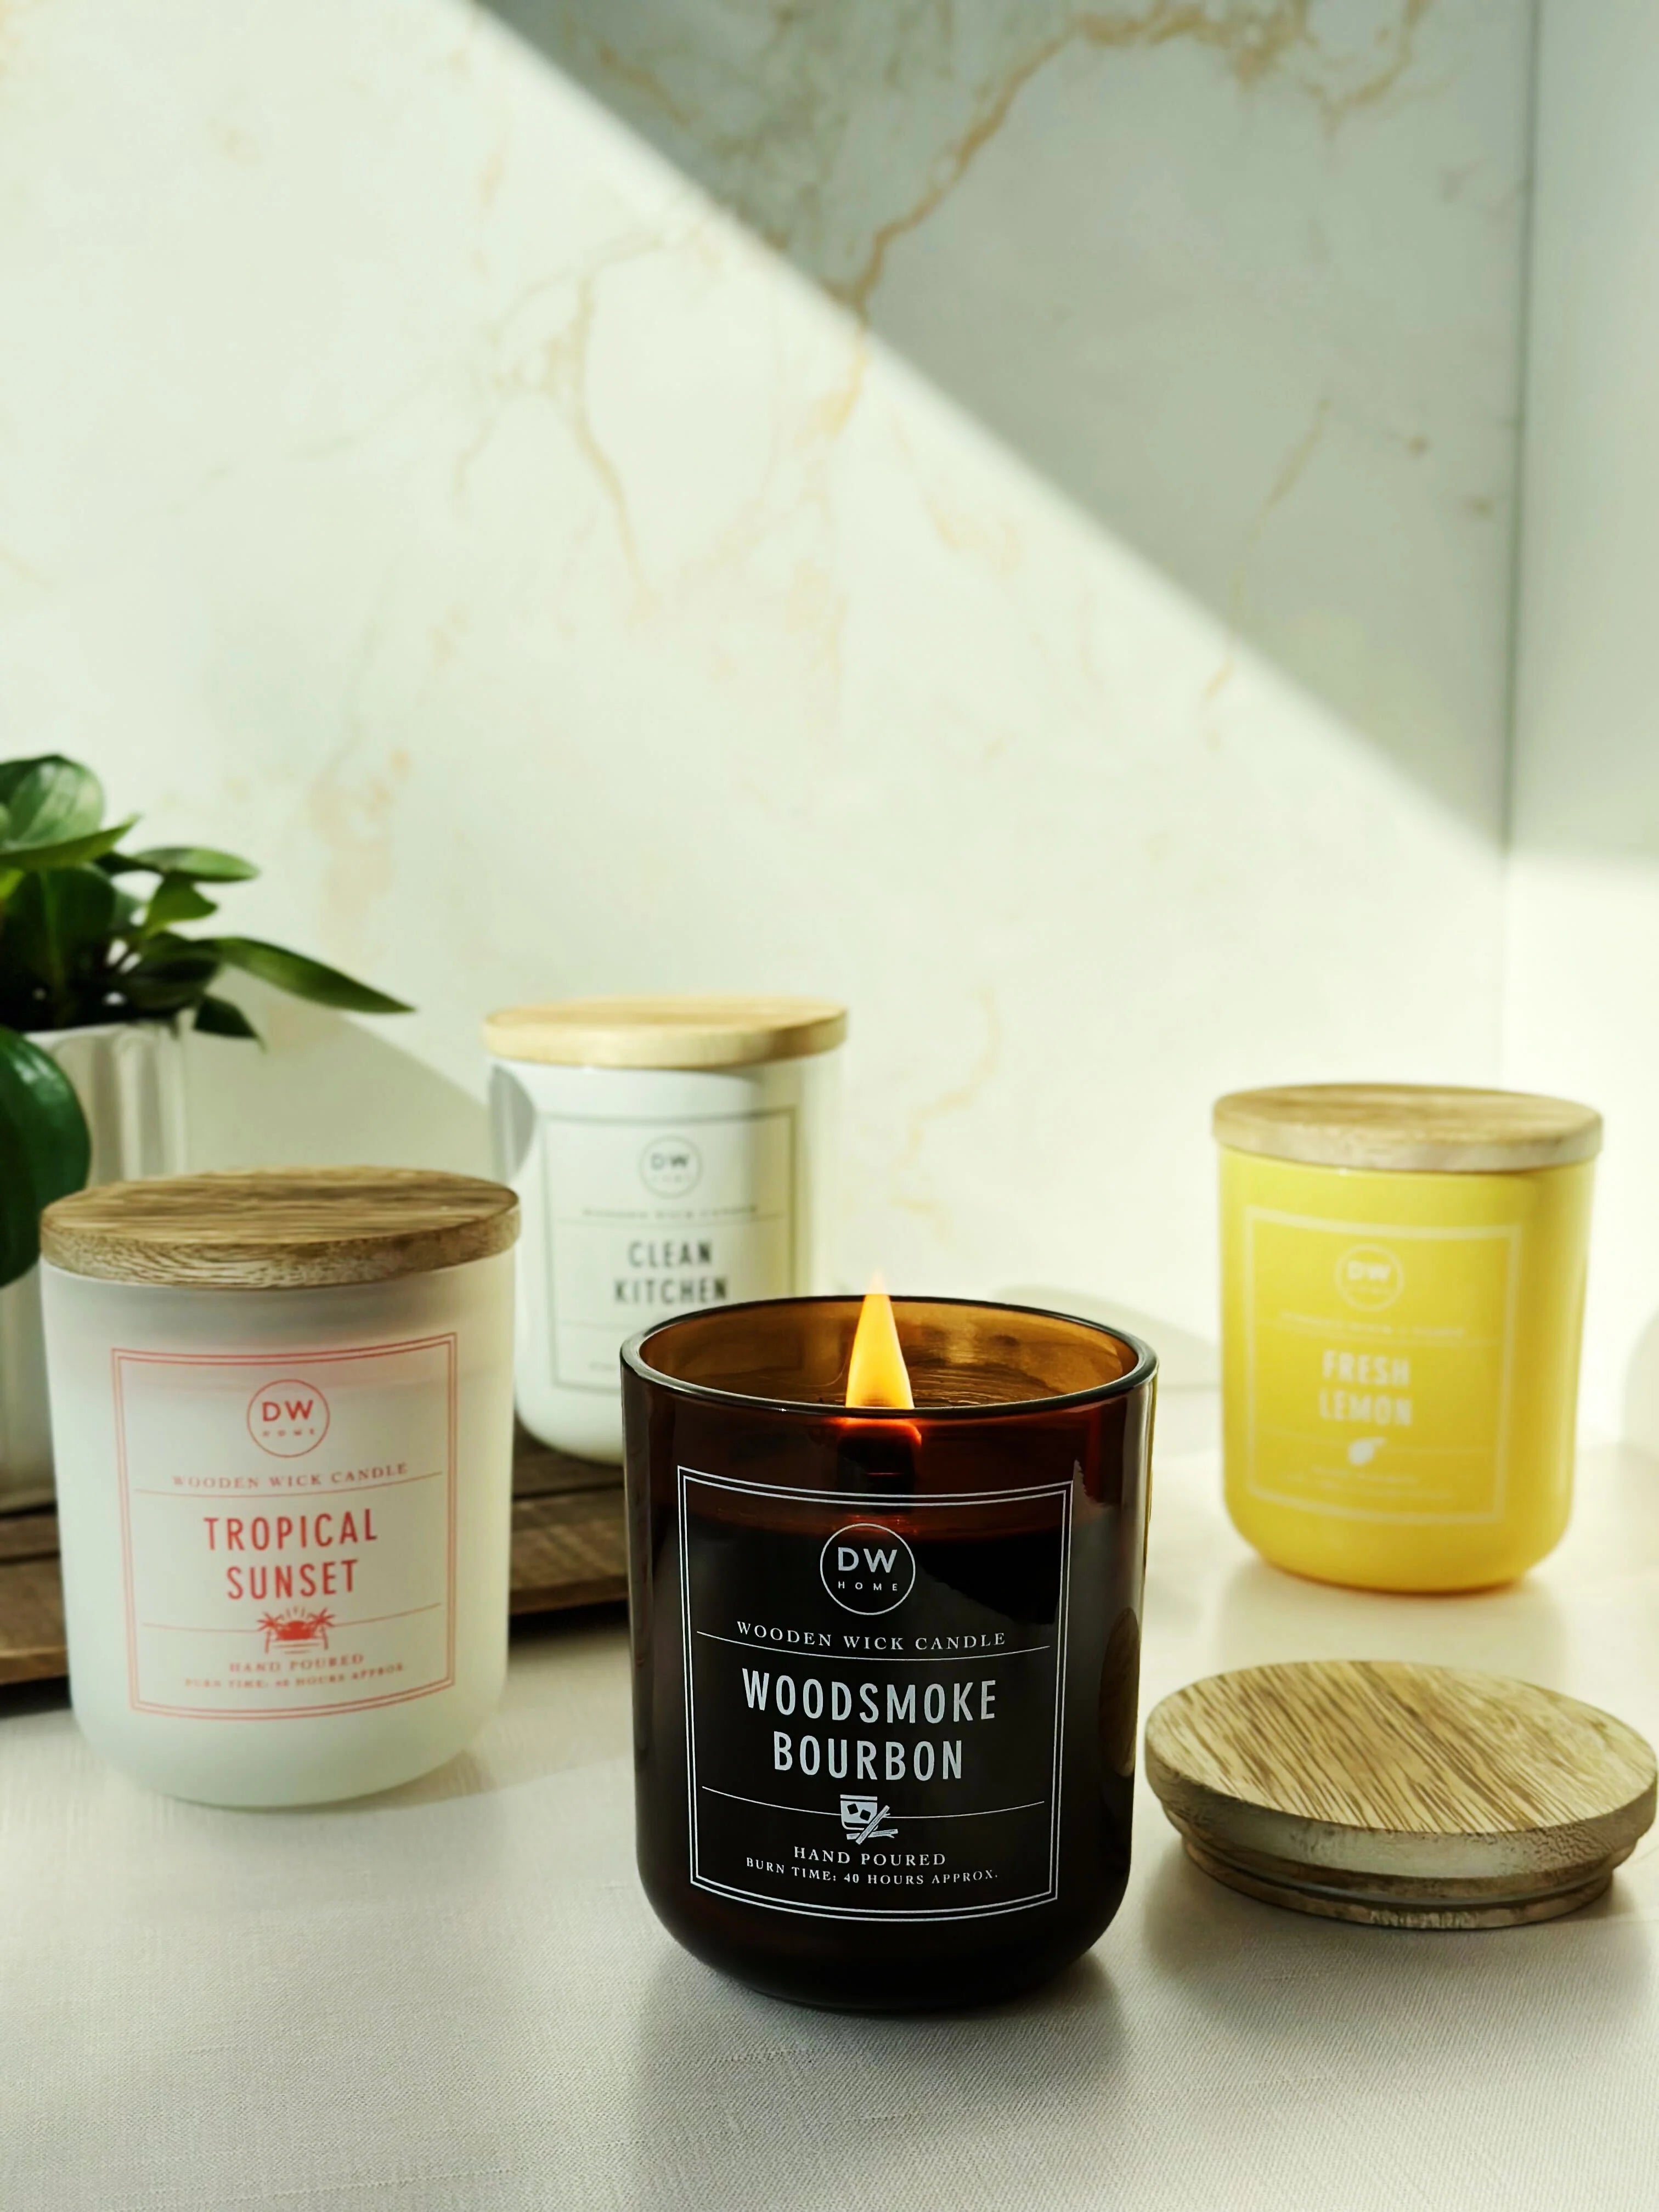 DW Home Signature Wooden Wick candles